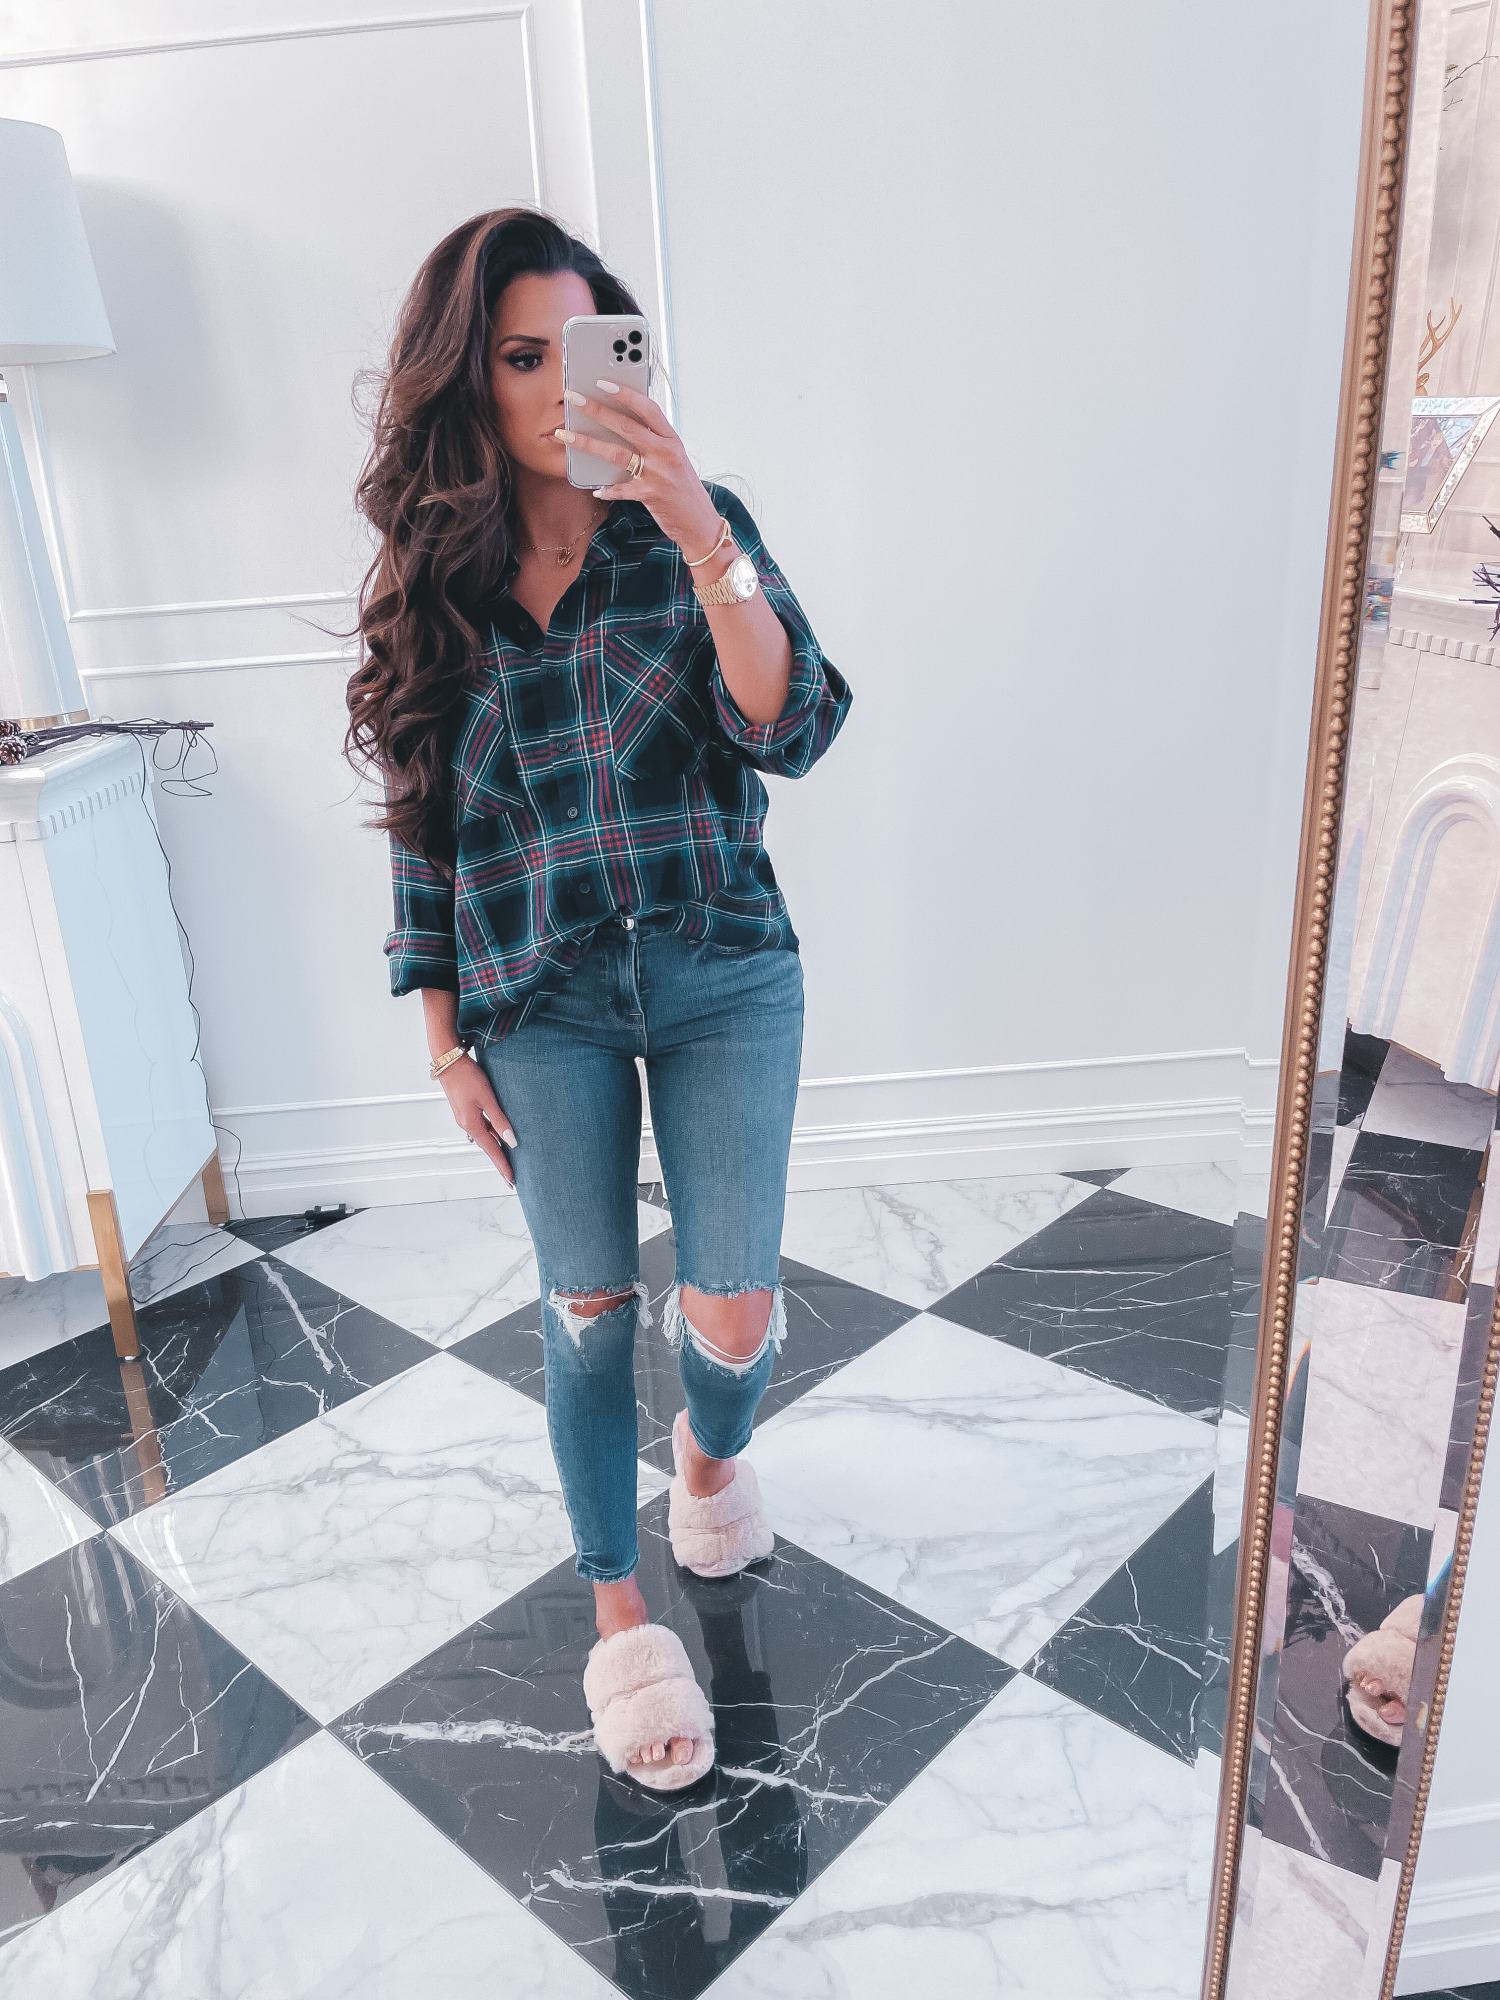 best black friday cyber monday sales 2020, top black friday sales 2020, emily gemma1 |2020 Black Friday Deals by popular US life and style blog, The Sweetest Thing: image of Emily Gemma wearing a plaid button up shirt, distressed denim, and fuzzy pink sandal slippers. 